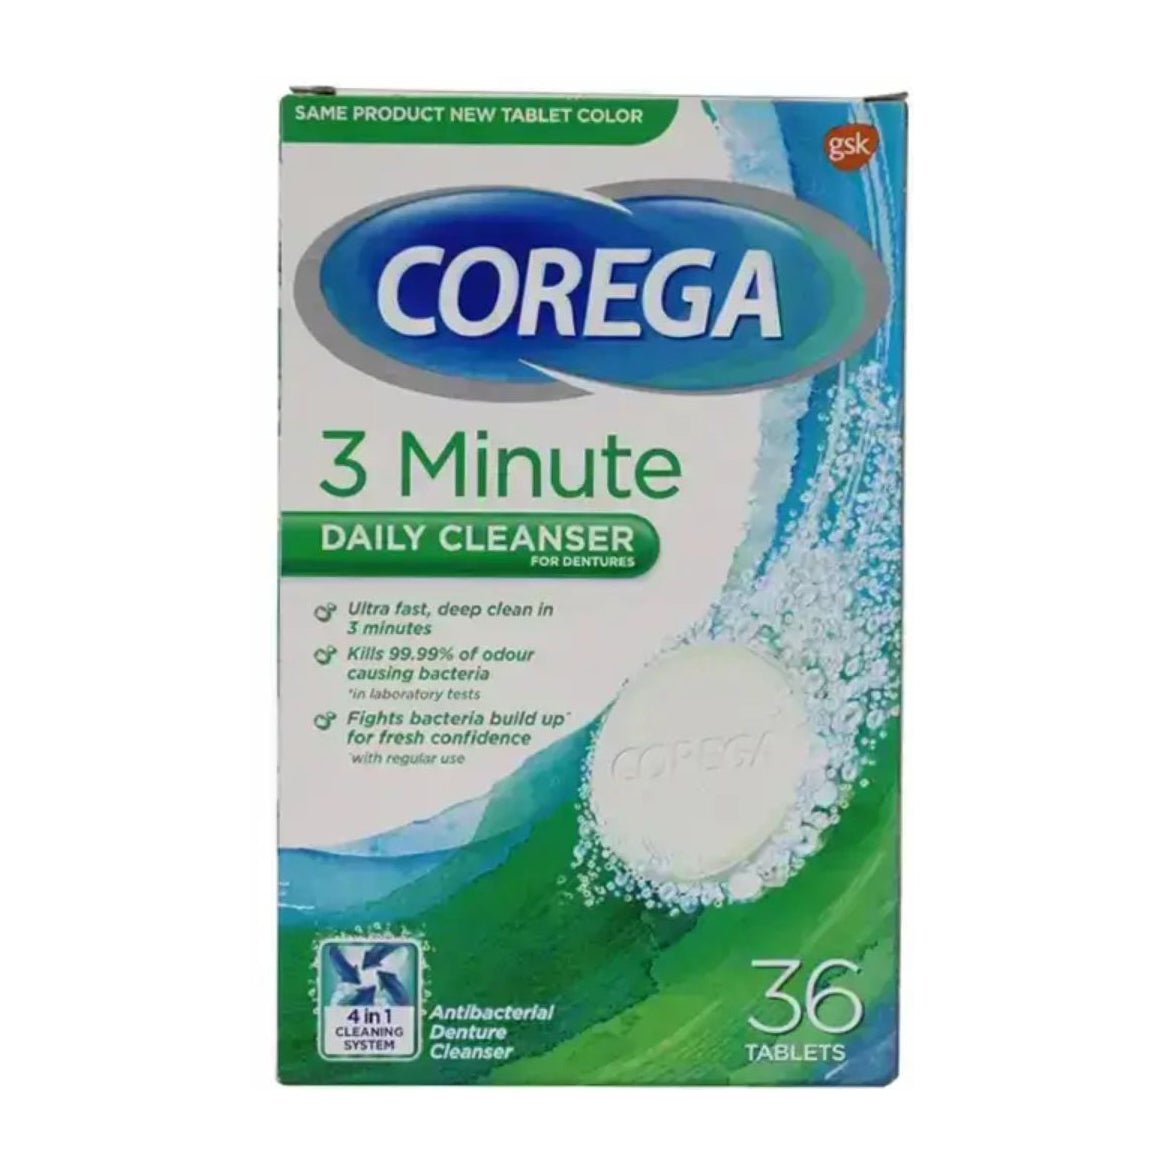 Corega 3 Minute Daily Cleanser - 36 Tablets - Bloom Pharmacy